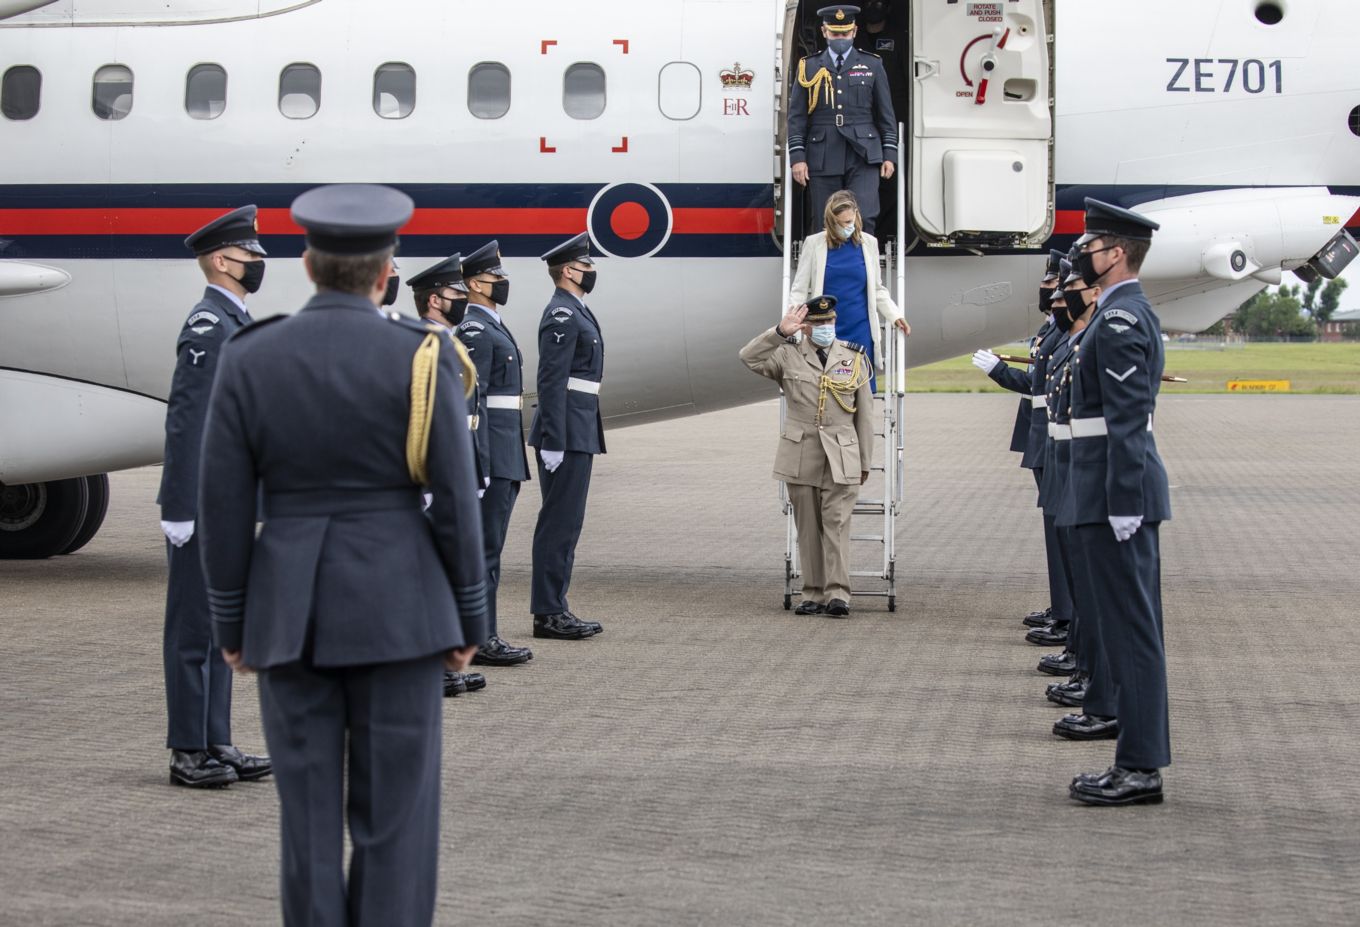 Air Chief Marshal Sir Stuart Peach saluting the gathered personnel as he leaves transport Aircraft.